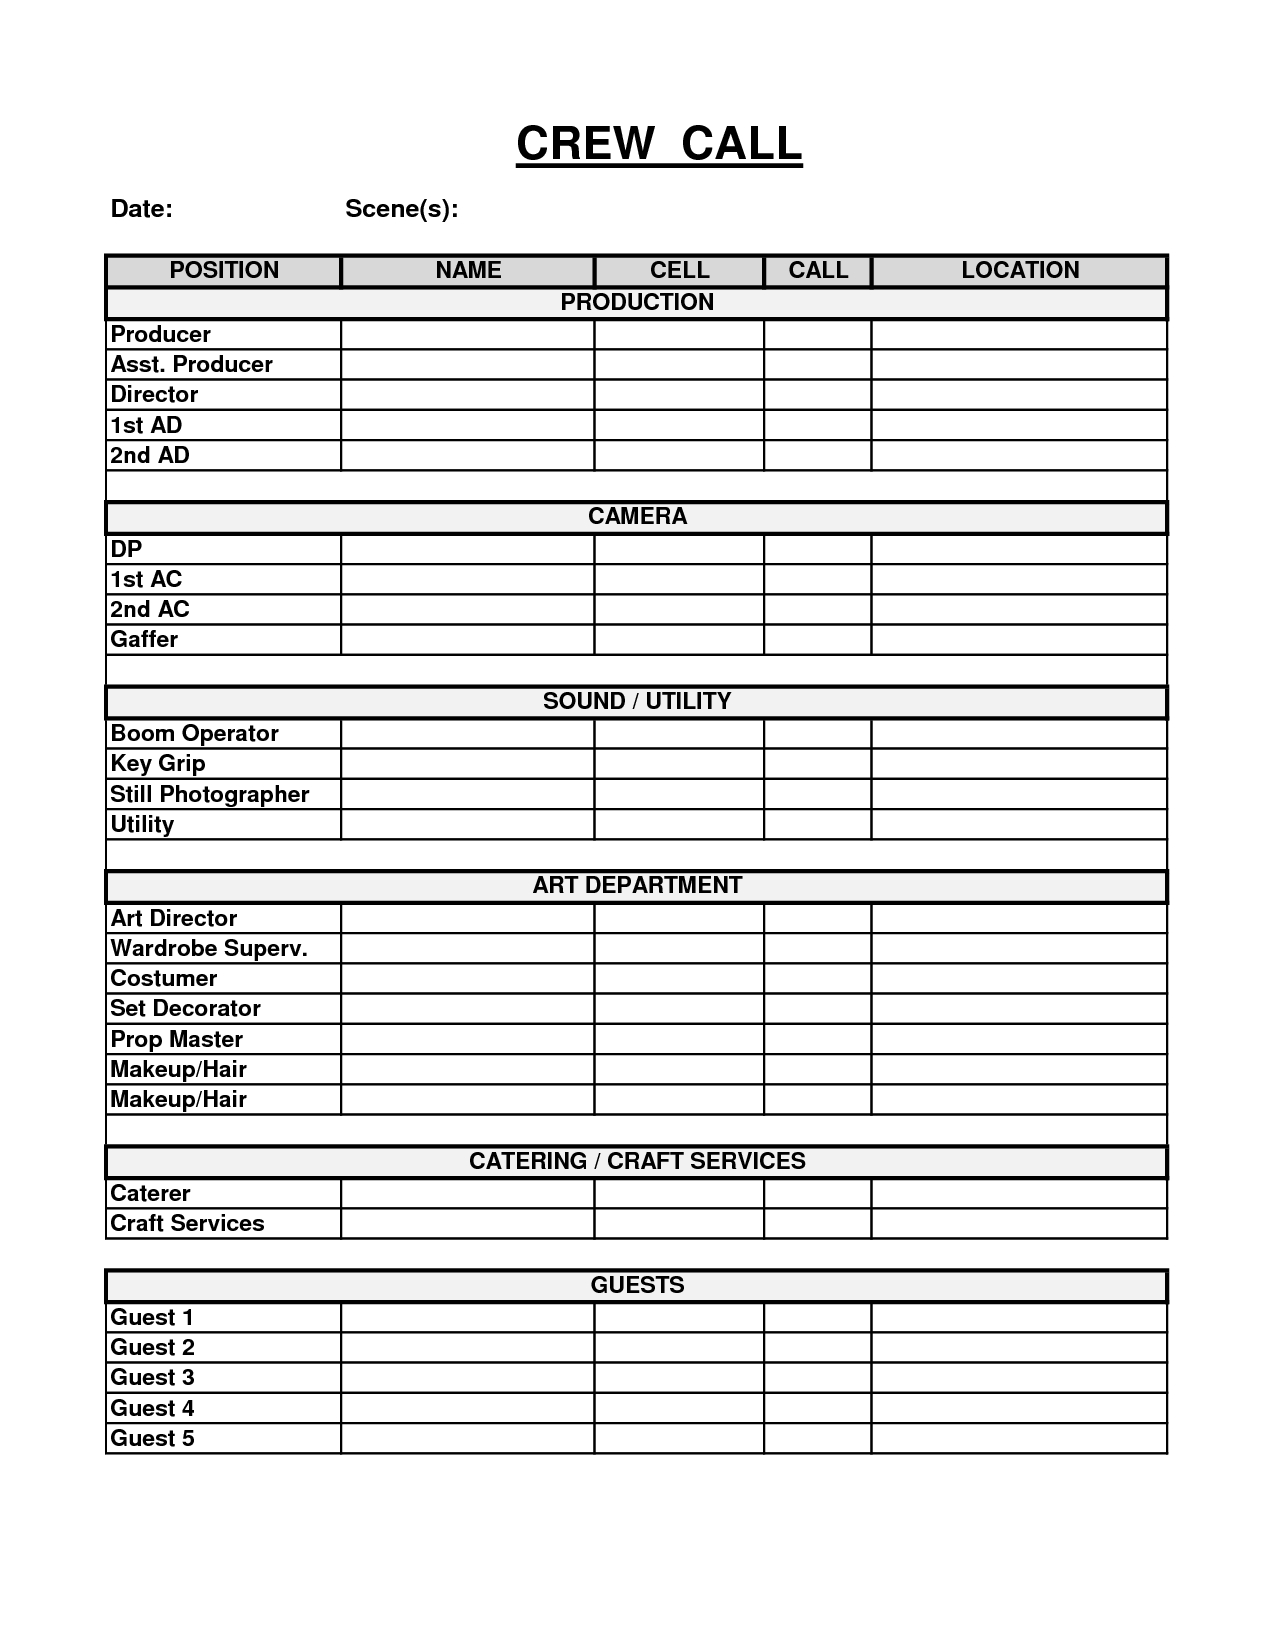 Easy To Use Crew Call And Call Sheet Template Sample : V M D Intended For Film Call Sheet Template Word